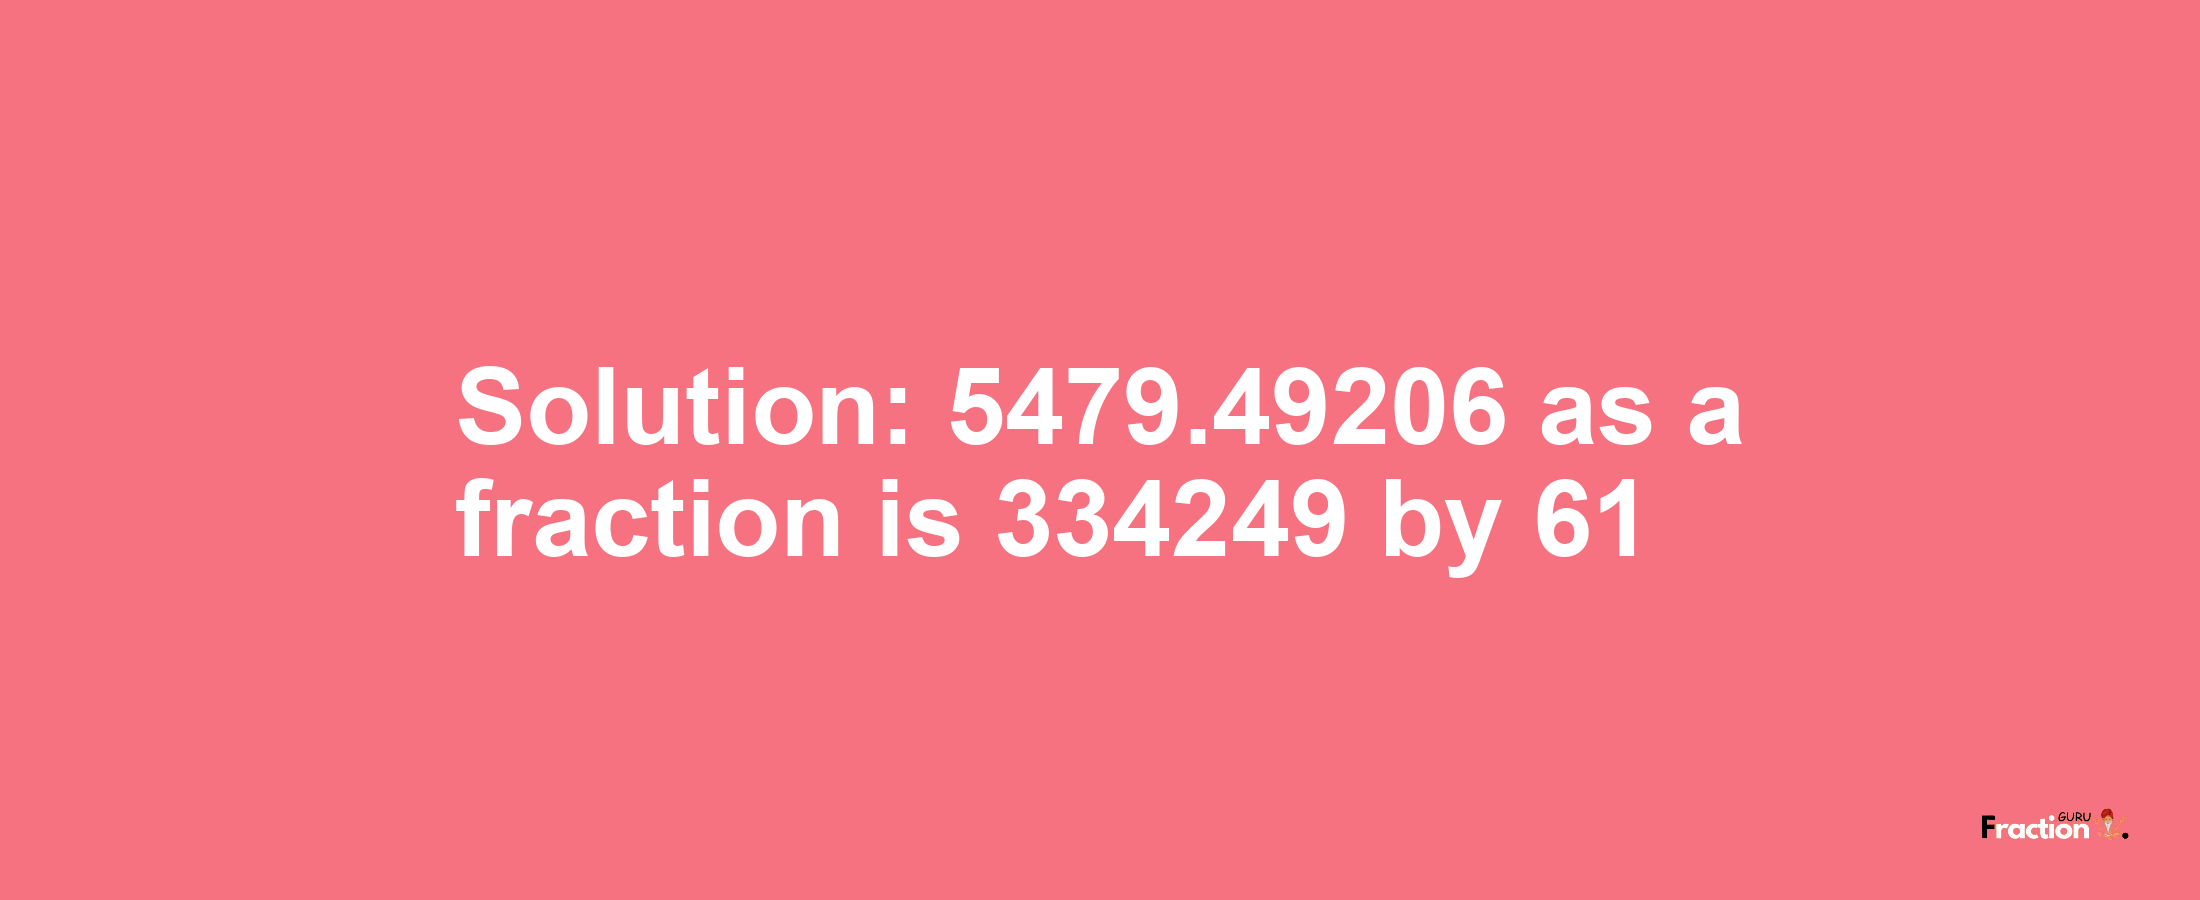 Solution:5479.49206 as a fraction is 334249/61